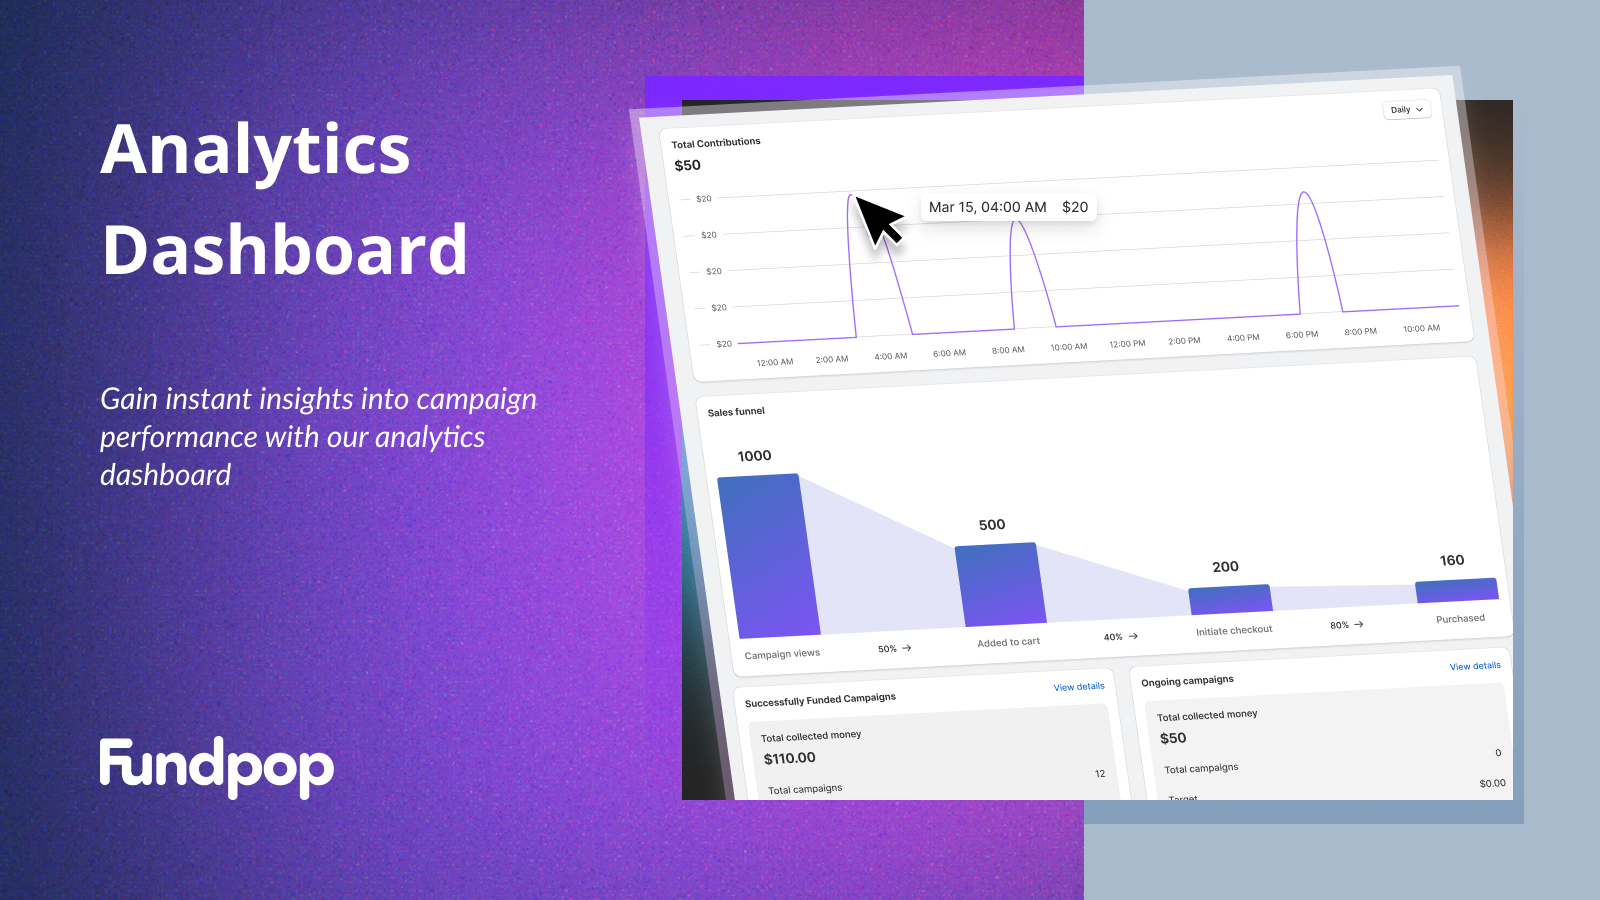 Gain insights into campaign performance instantly.